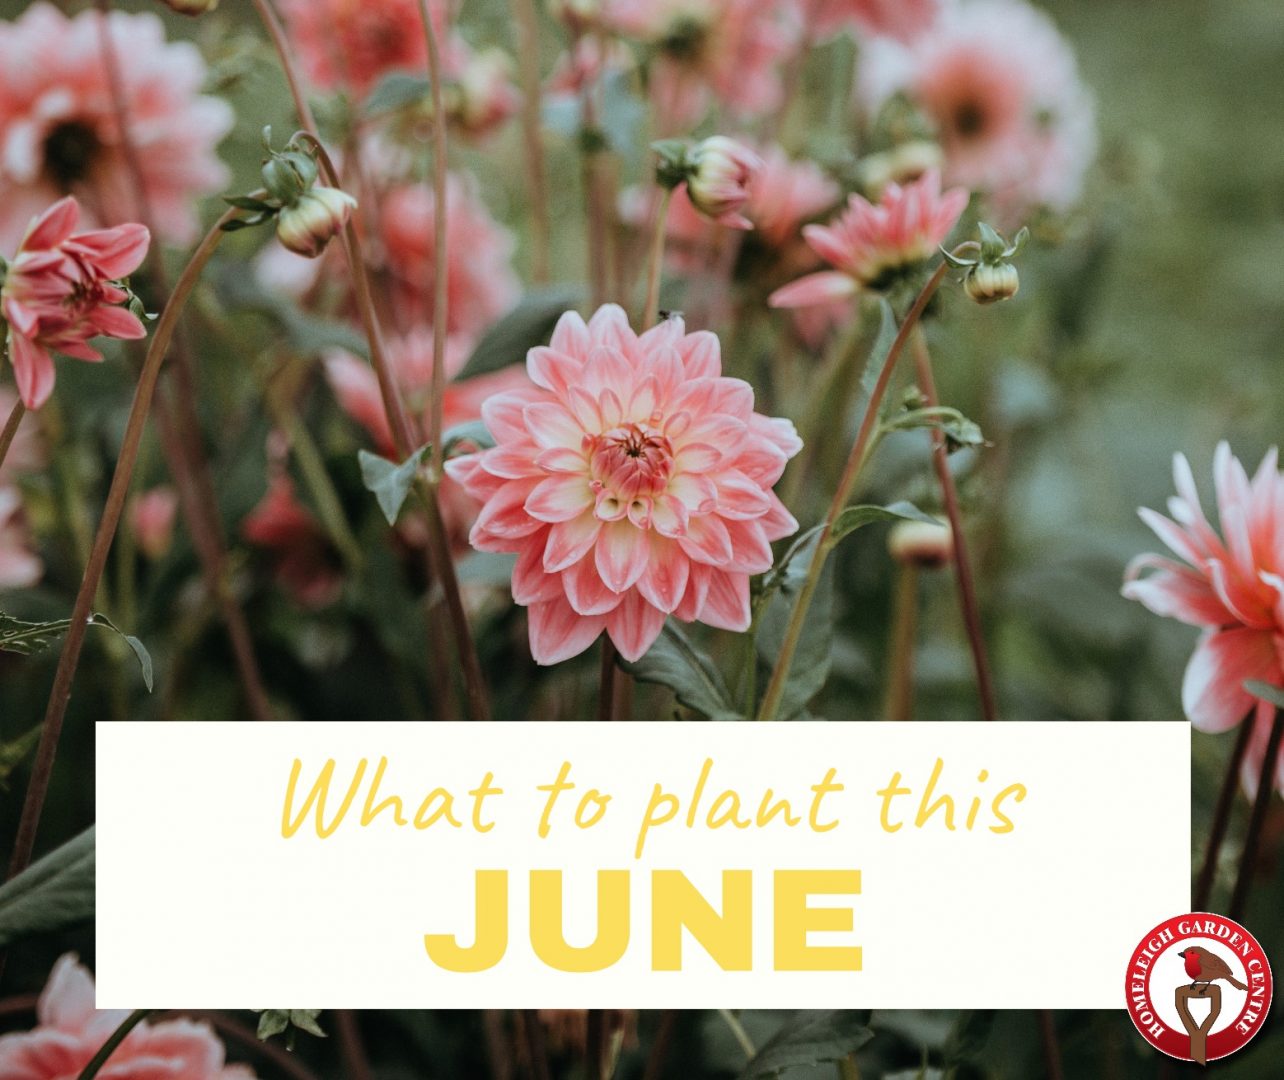 What to plant this June